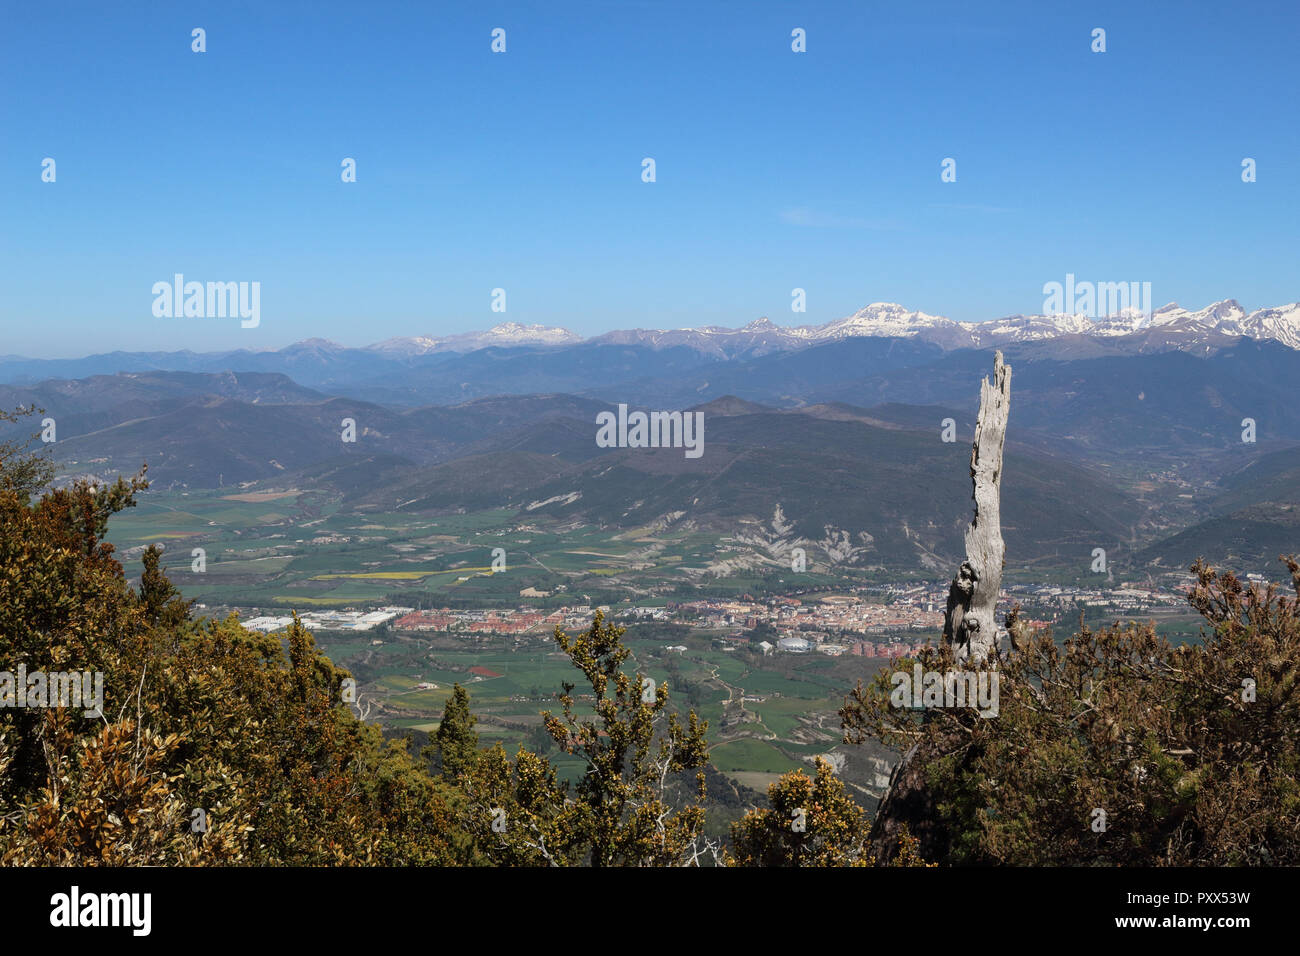 A landscape of snow-clad Pyrenees mountains and a wide valley with blue cloudy sky and some bushes in Peña Oroel, Aragon region, Spain Stock Photo